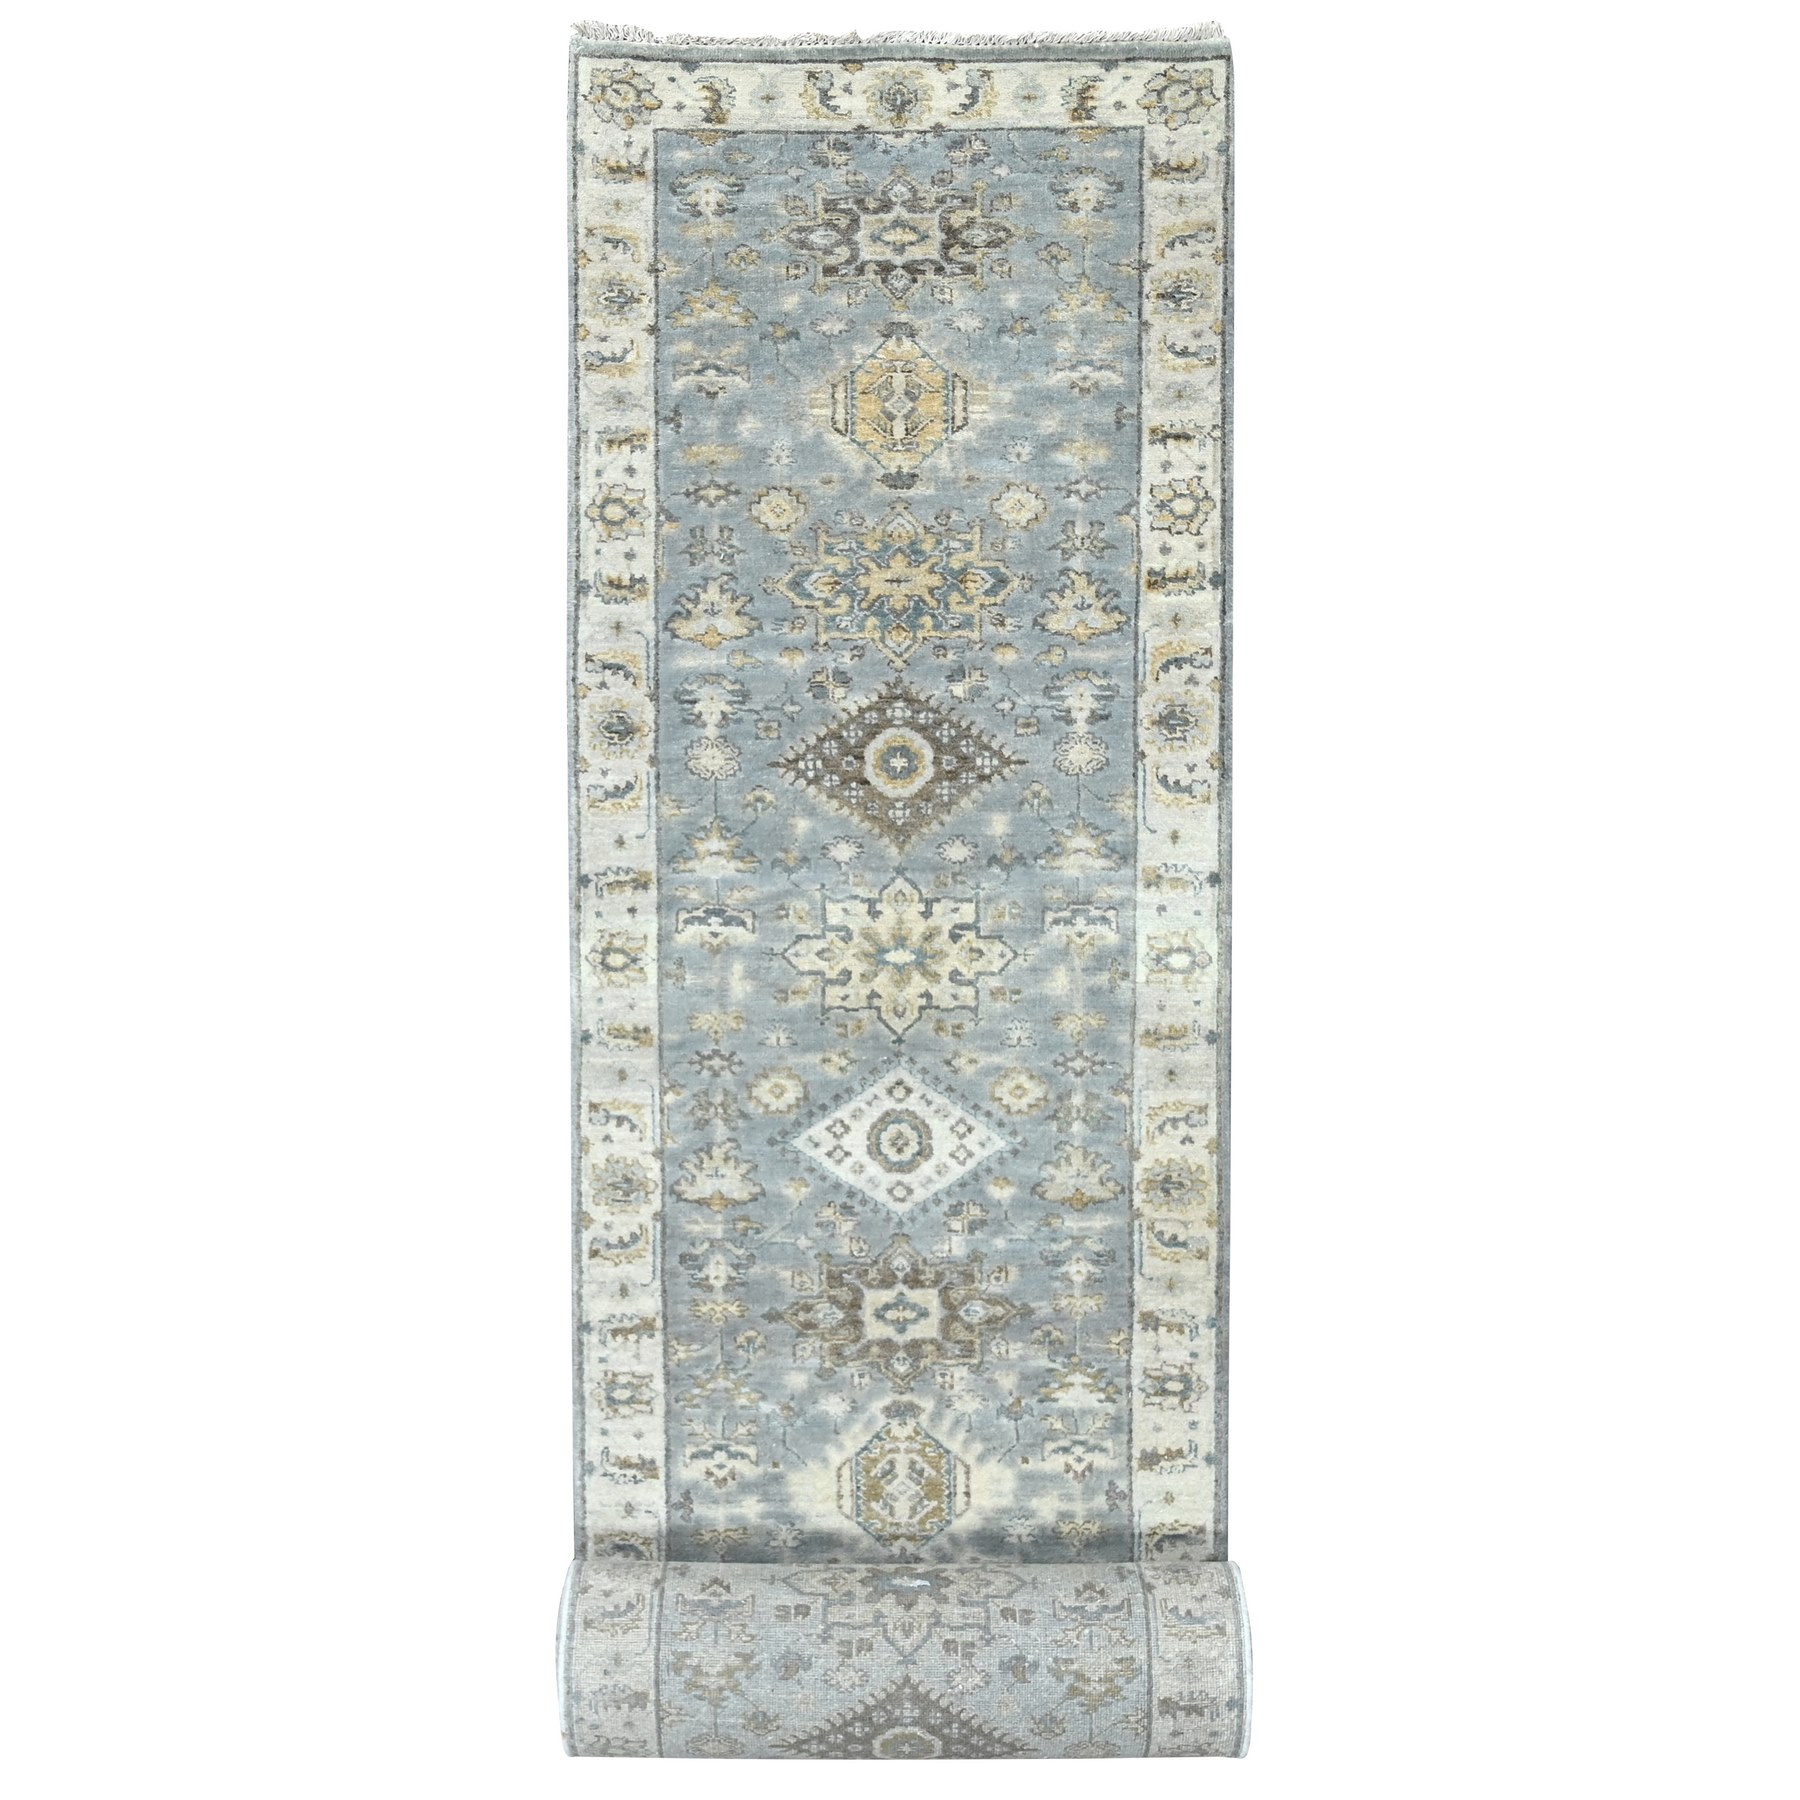  Wool Hand-Knotted Area Rug 2'9